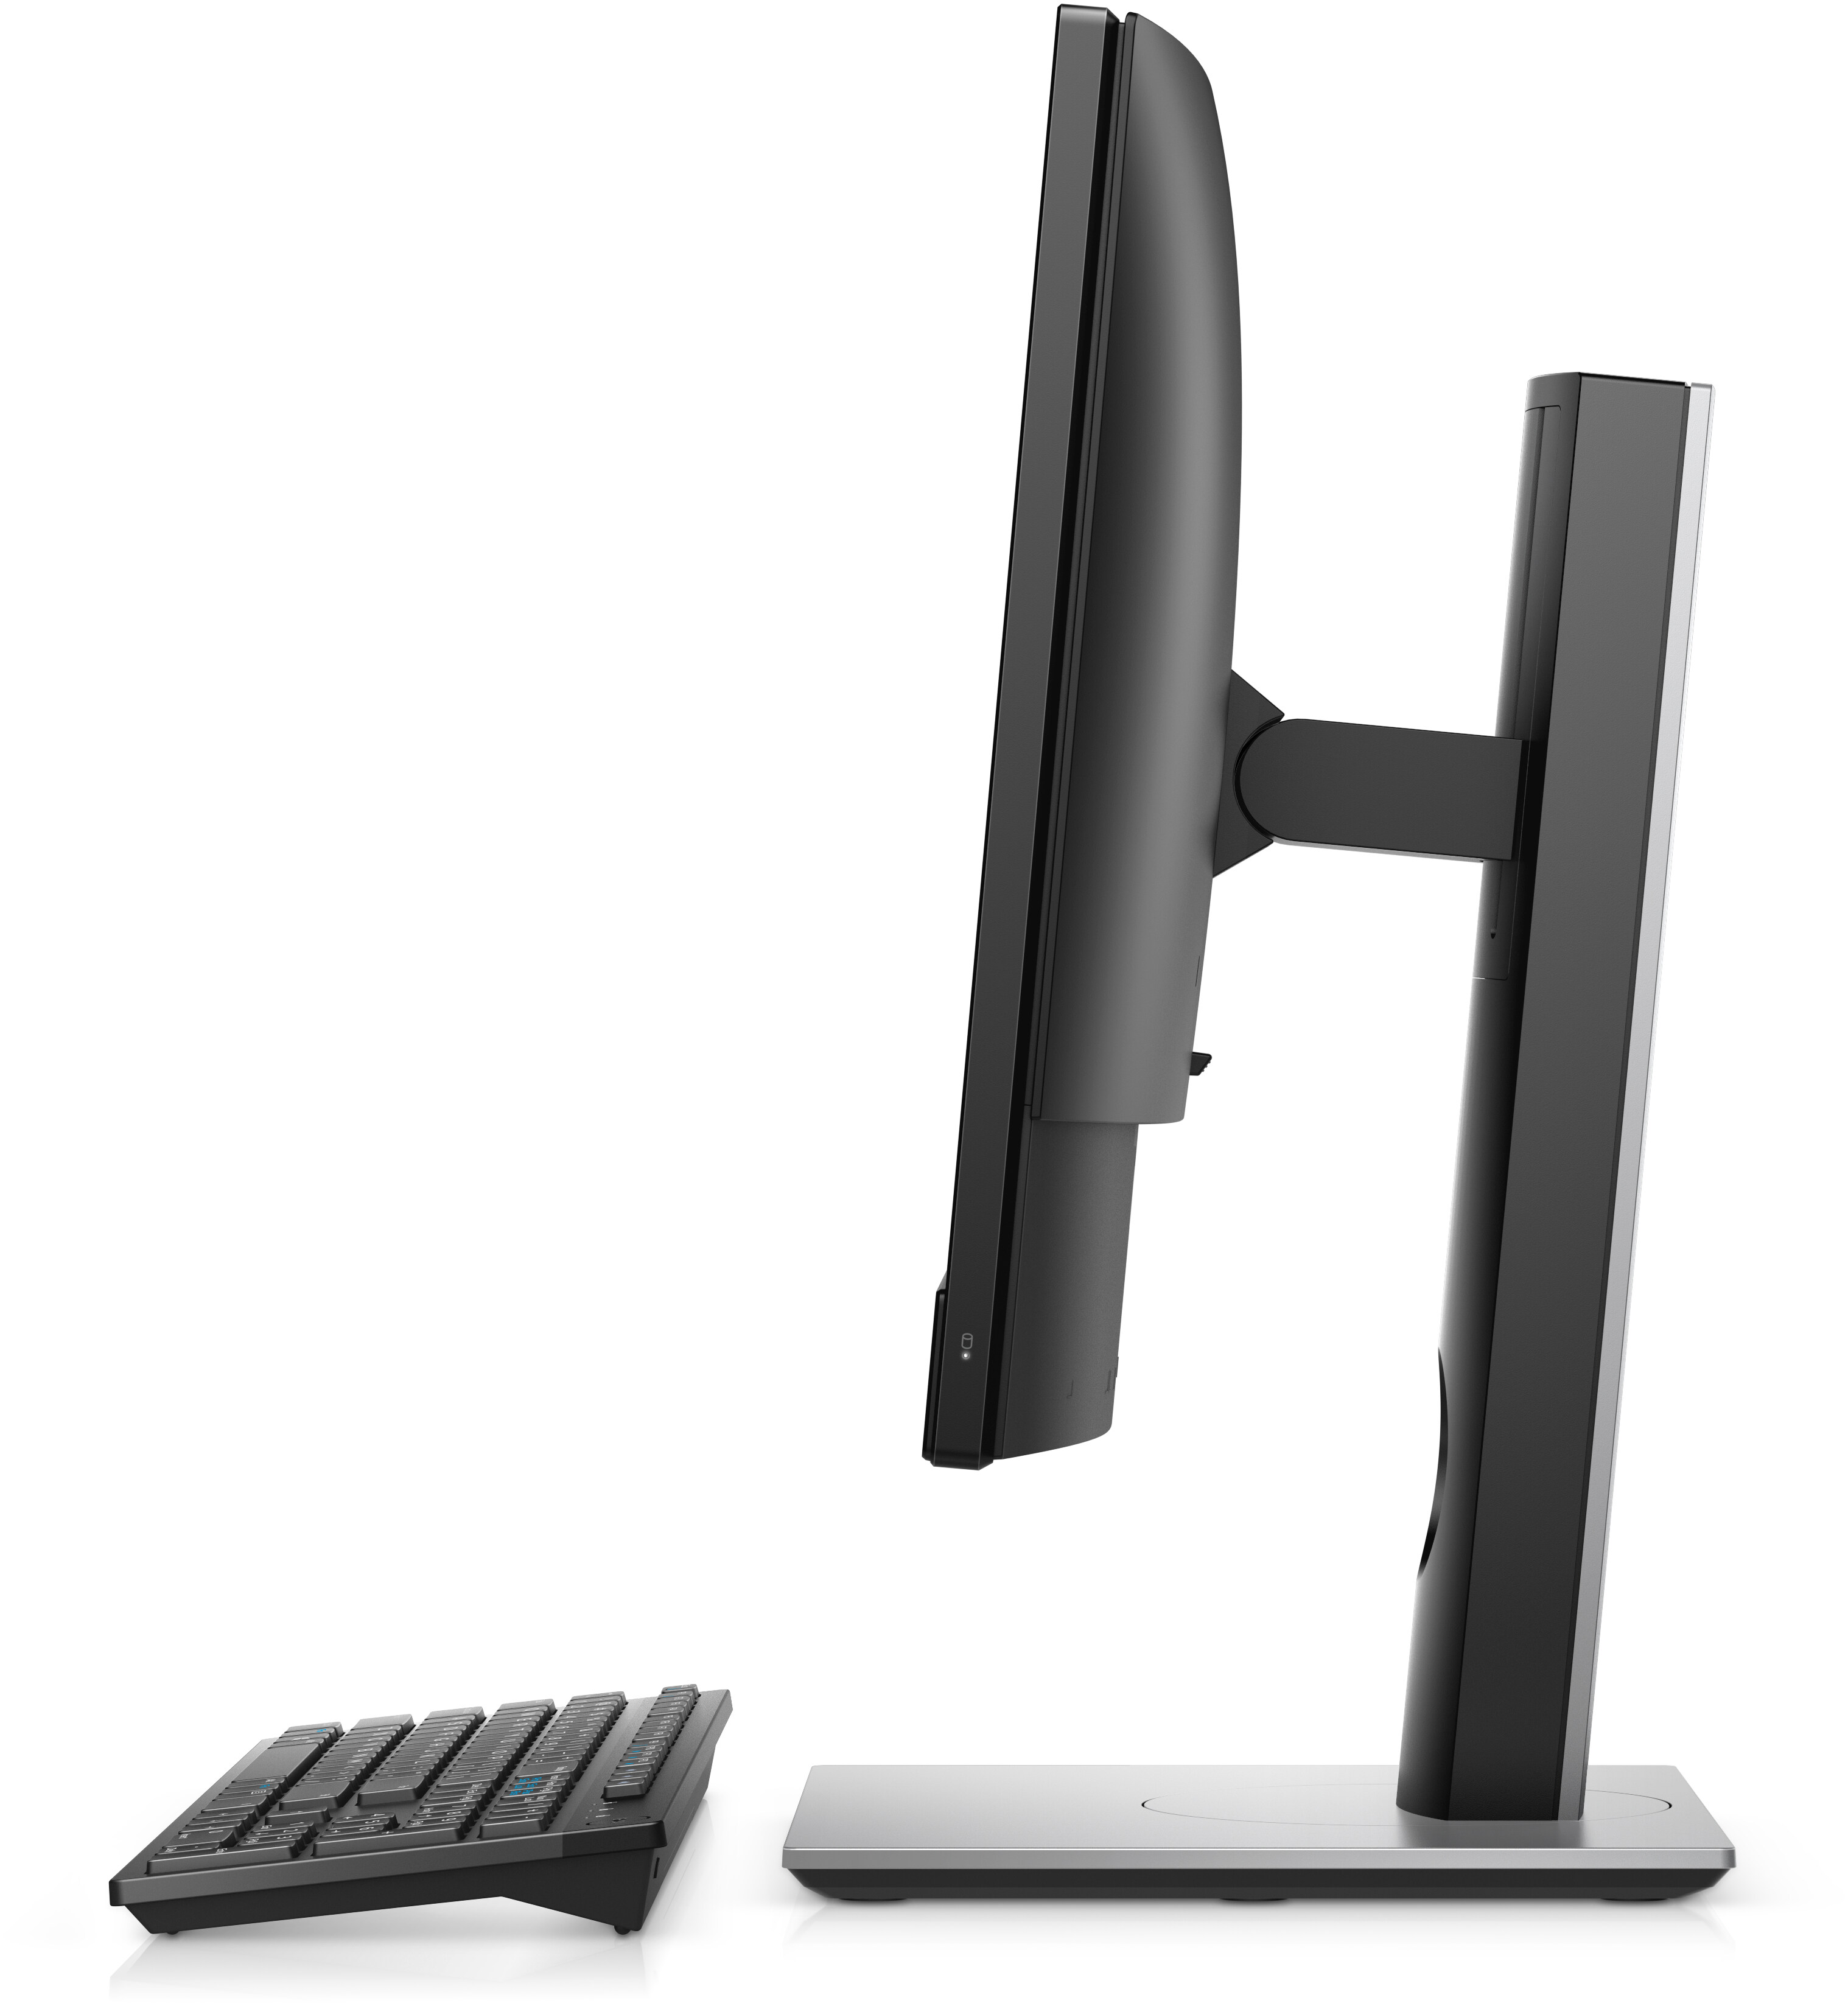 OptiPlex 3280 22-Inch All-in-One PC with FHD Display